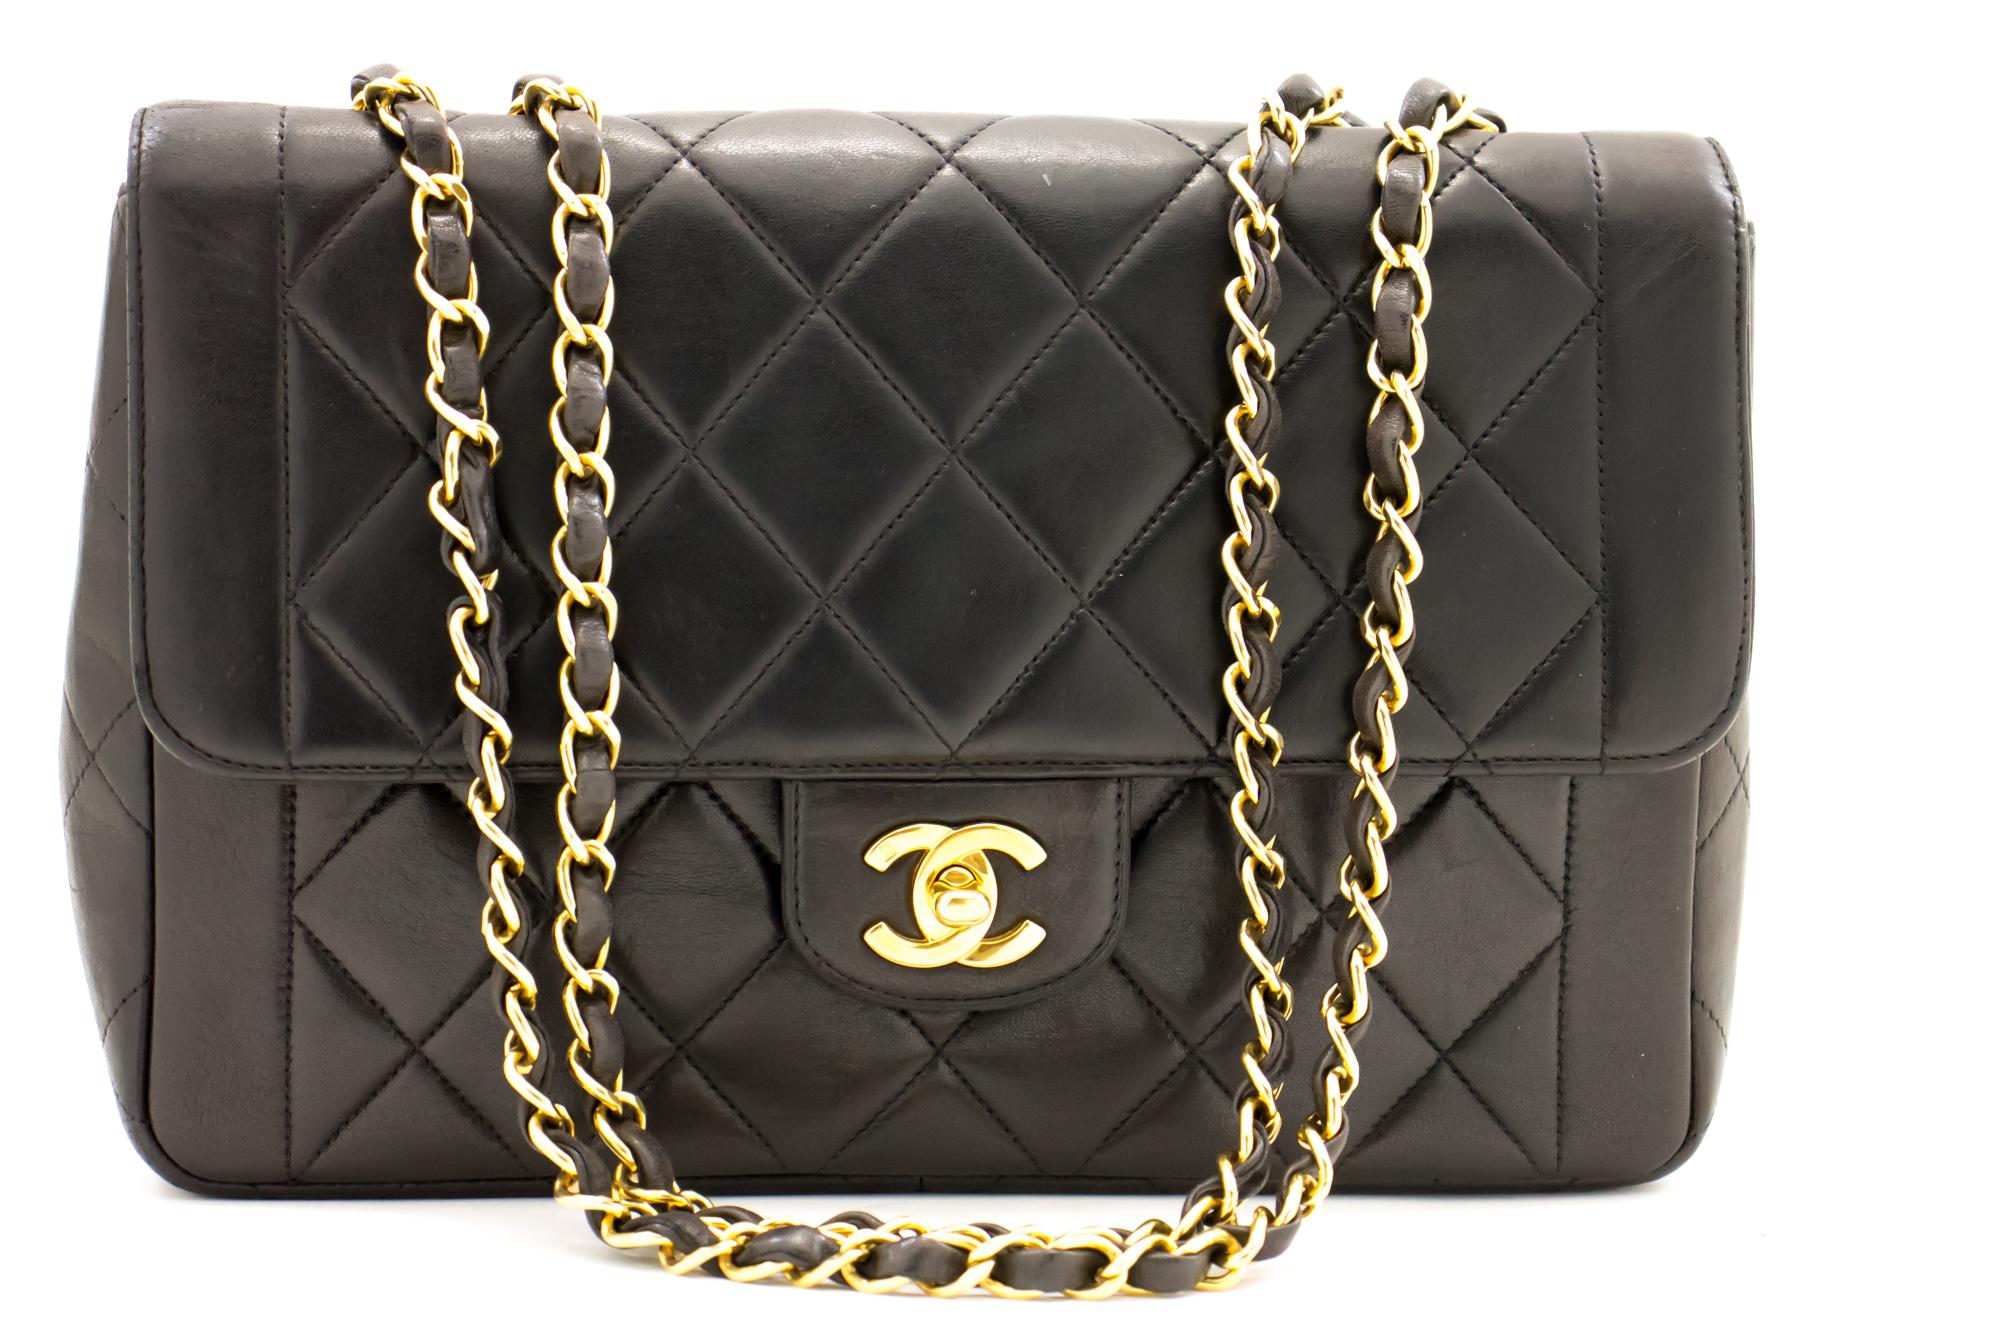 An authentic CHANEL Vintage Chain Shoulder Bag Black Quilted Flap made of black Lambskin. The color is Black. The outside material is Leather. The pattern is Solid. This item is Vintage / Classic. The year of manufacture would be